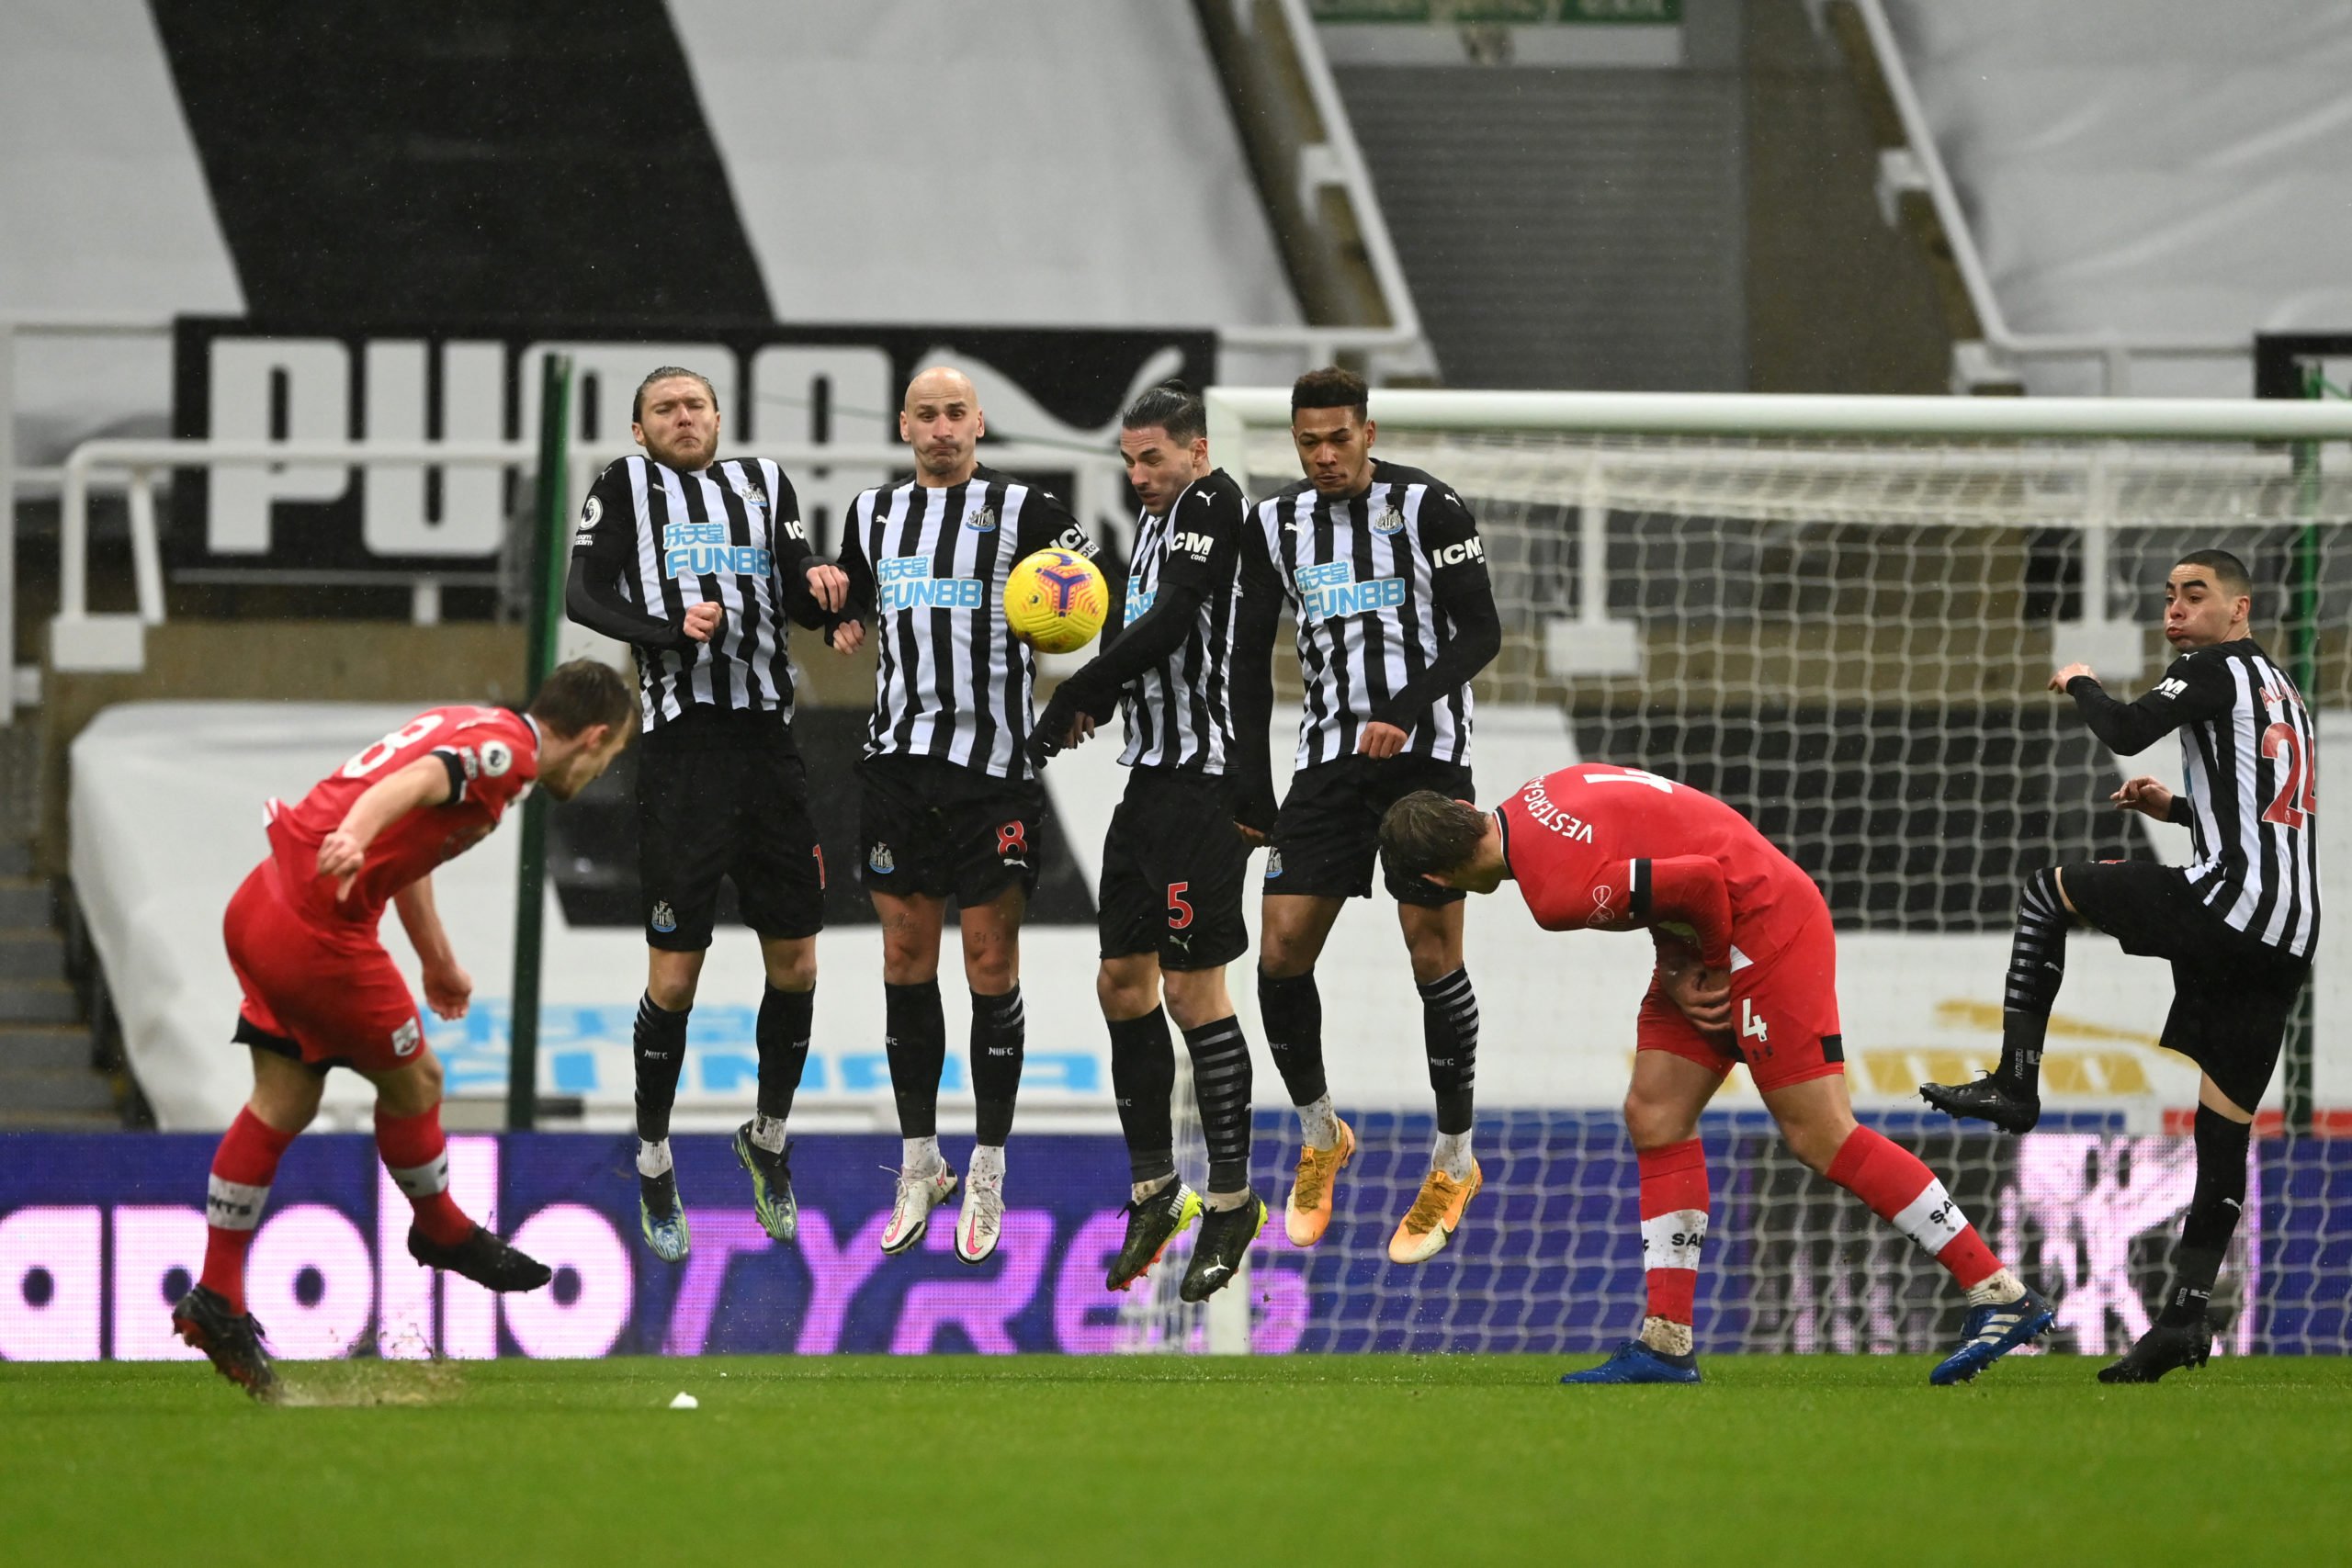 Newcastle United could face serious competition for Radu Dragusin (Newcastle players are in action in the picture)